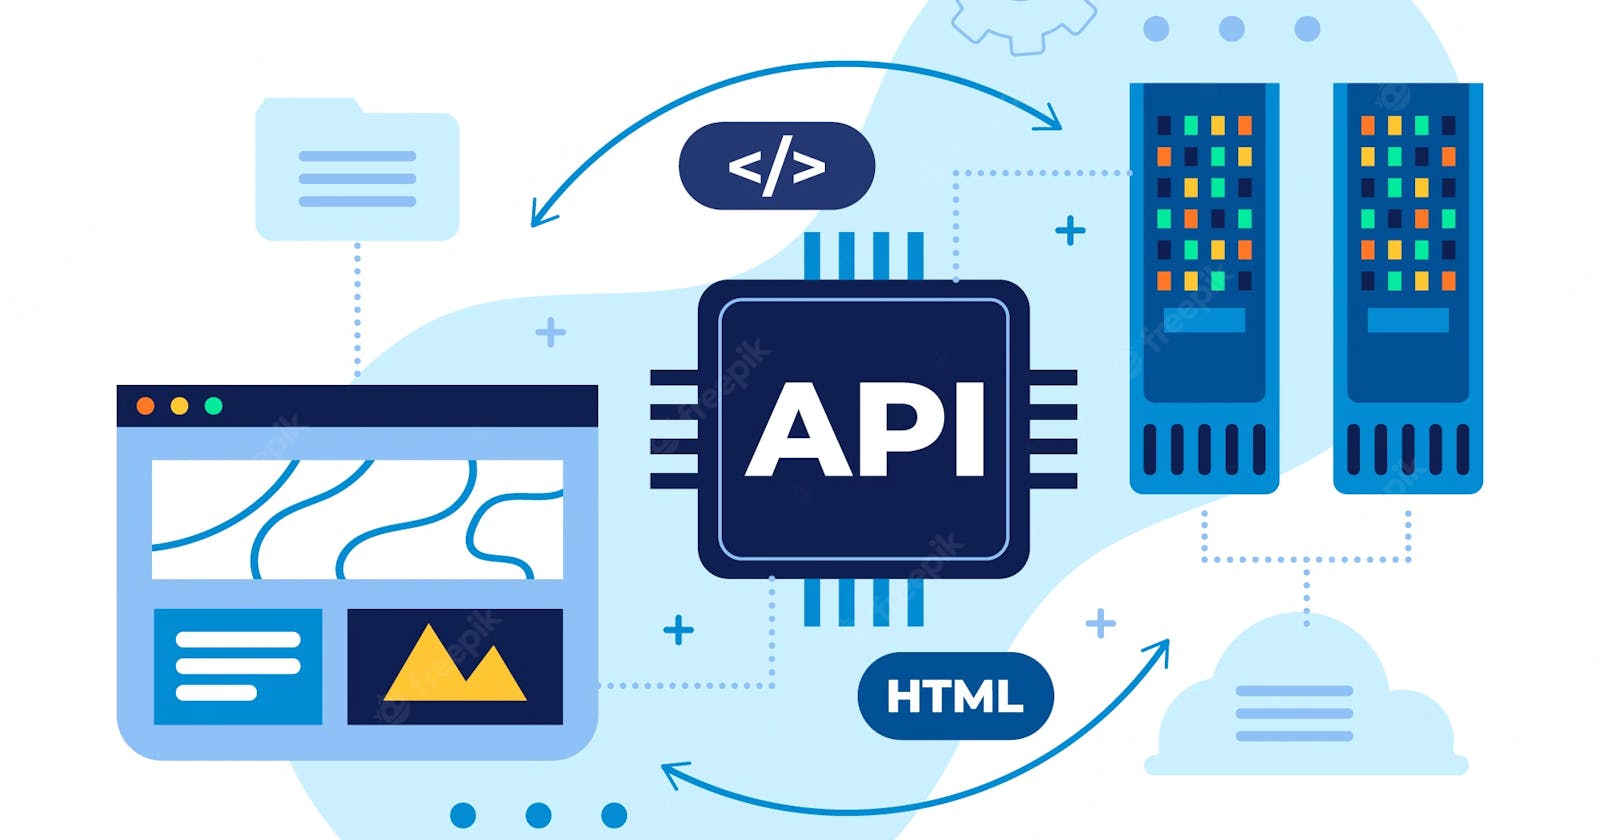 What an API consists of❓